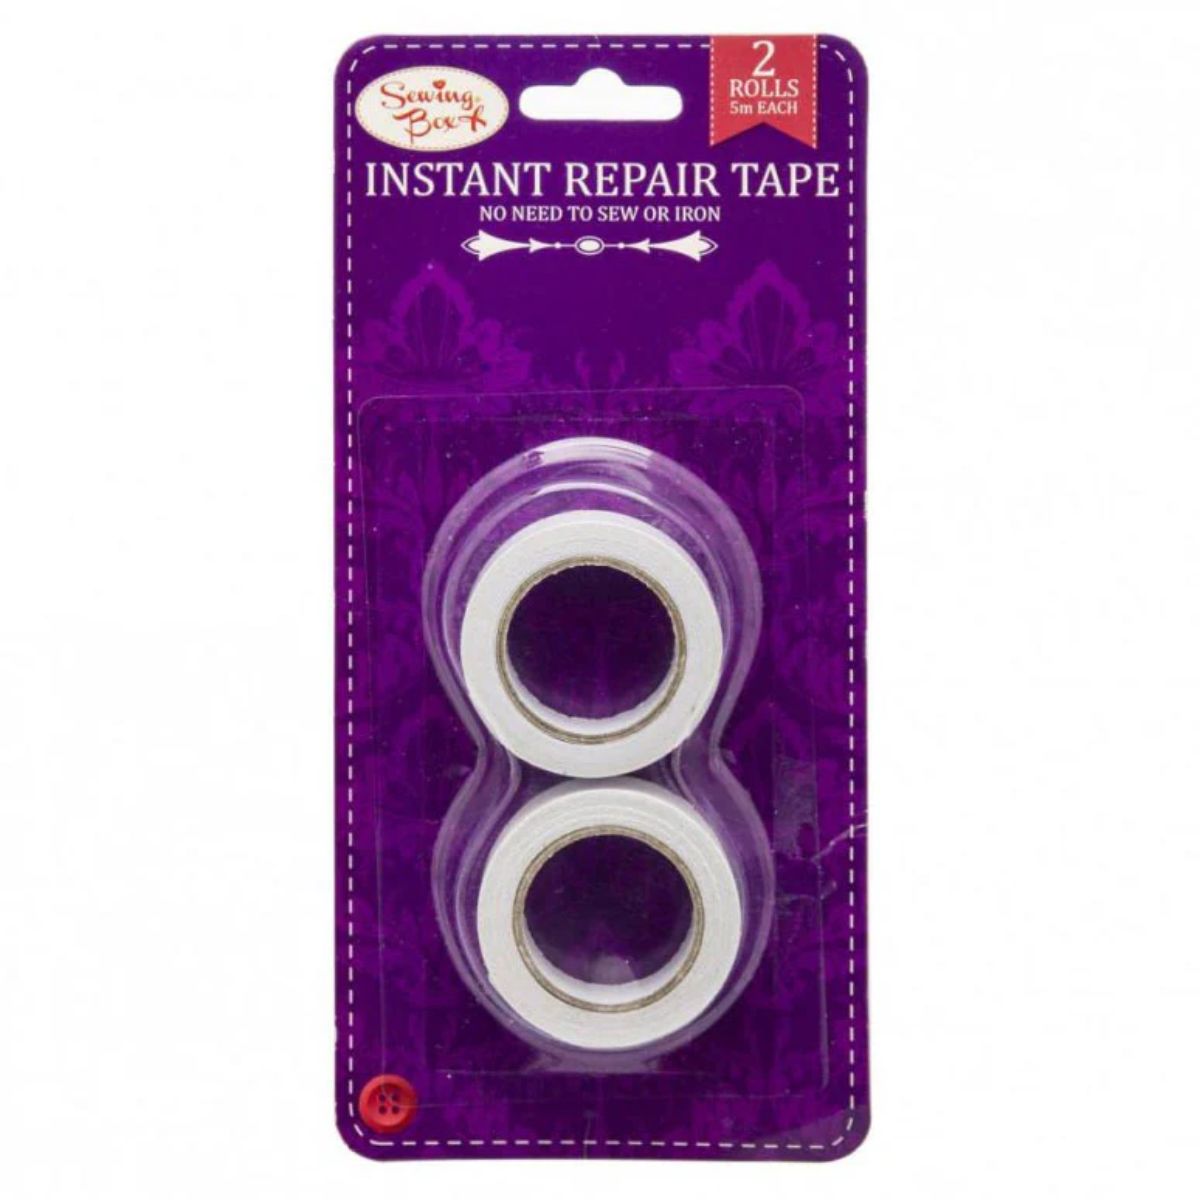 Two rolls of Sewing Box - Instant Repair Tape Double Sided - 2pcs packaged for sale.